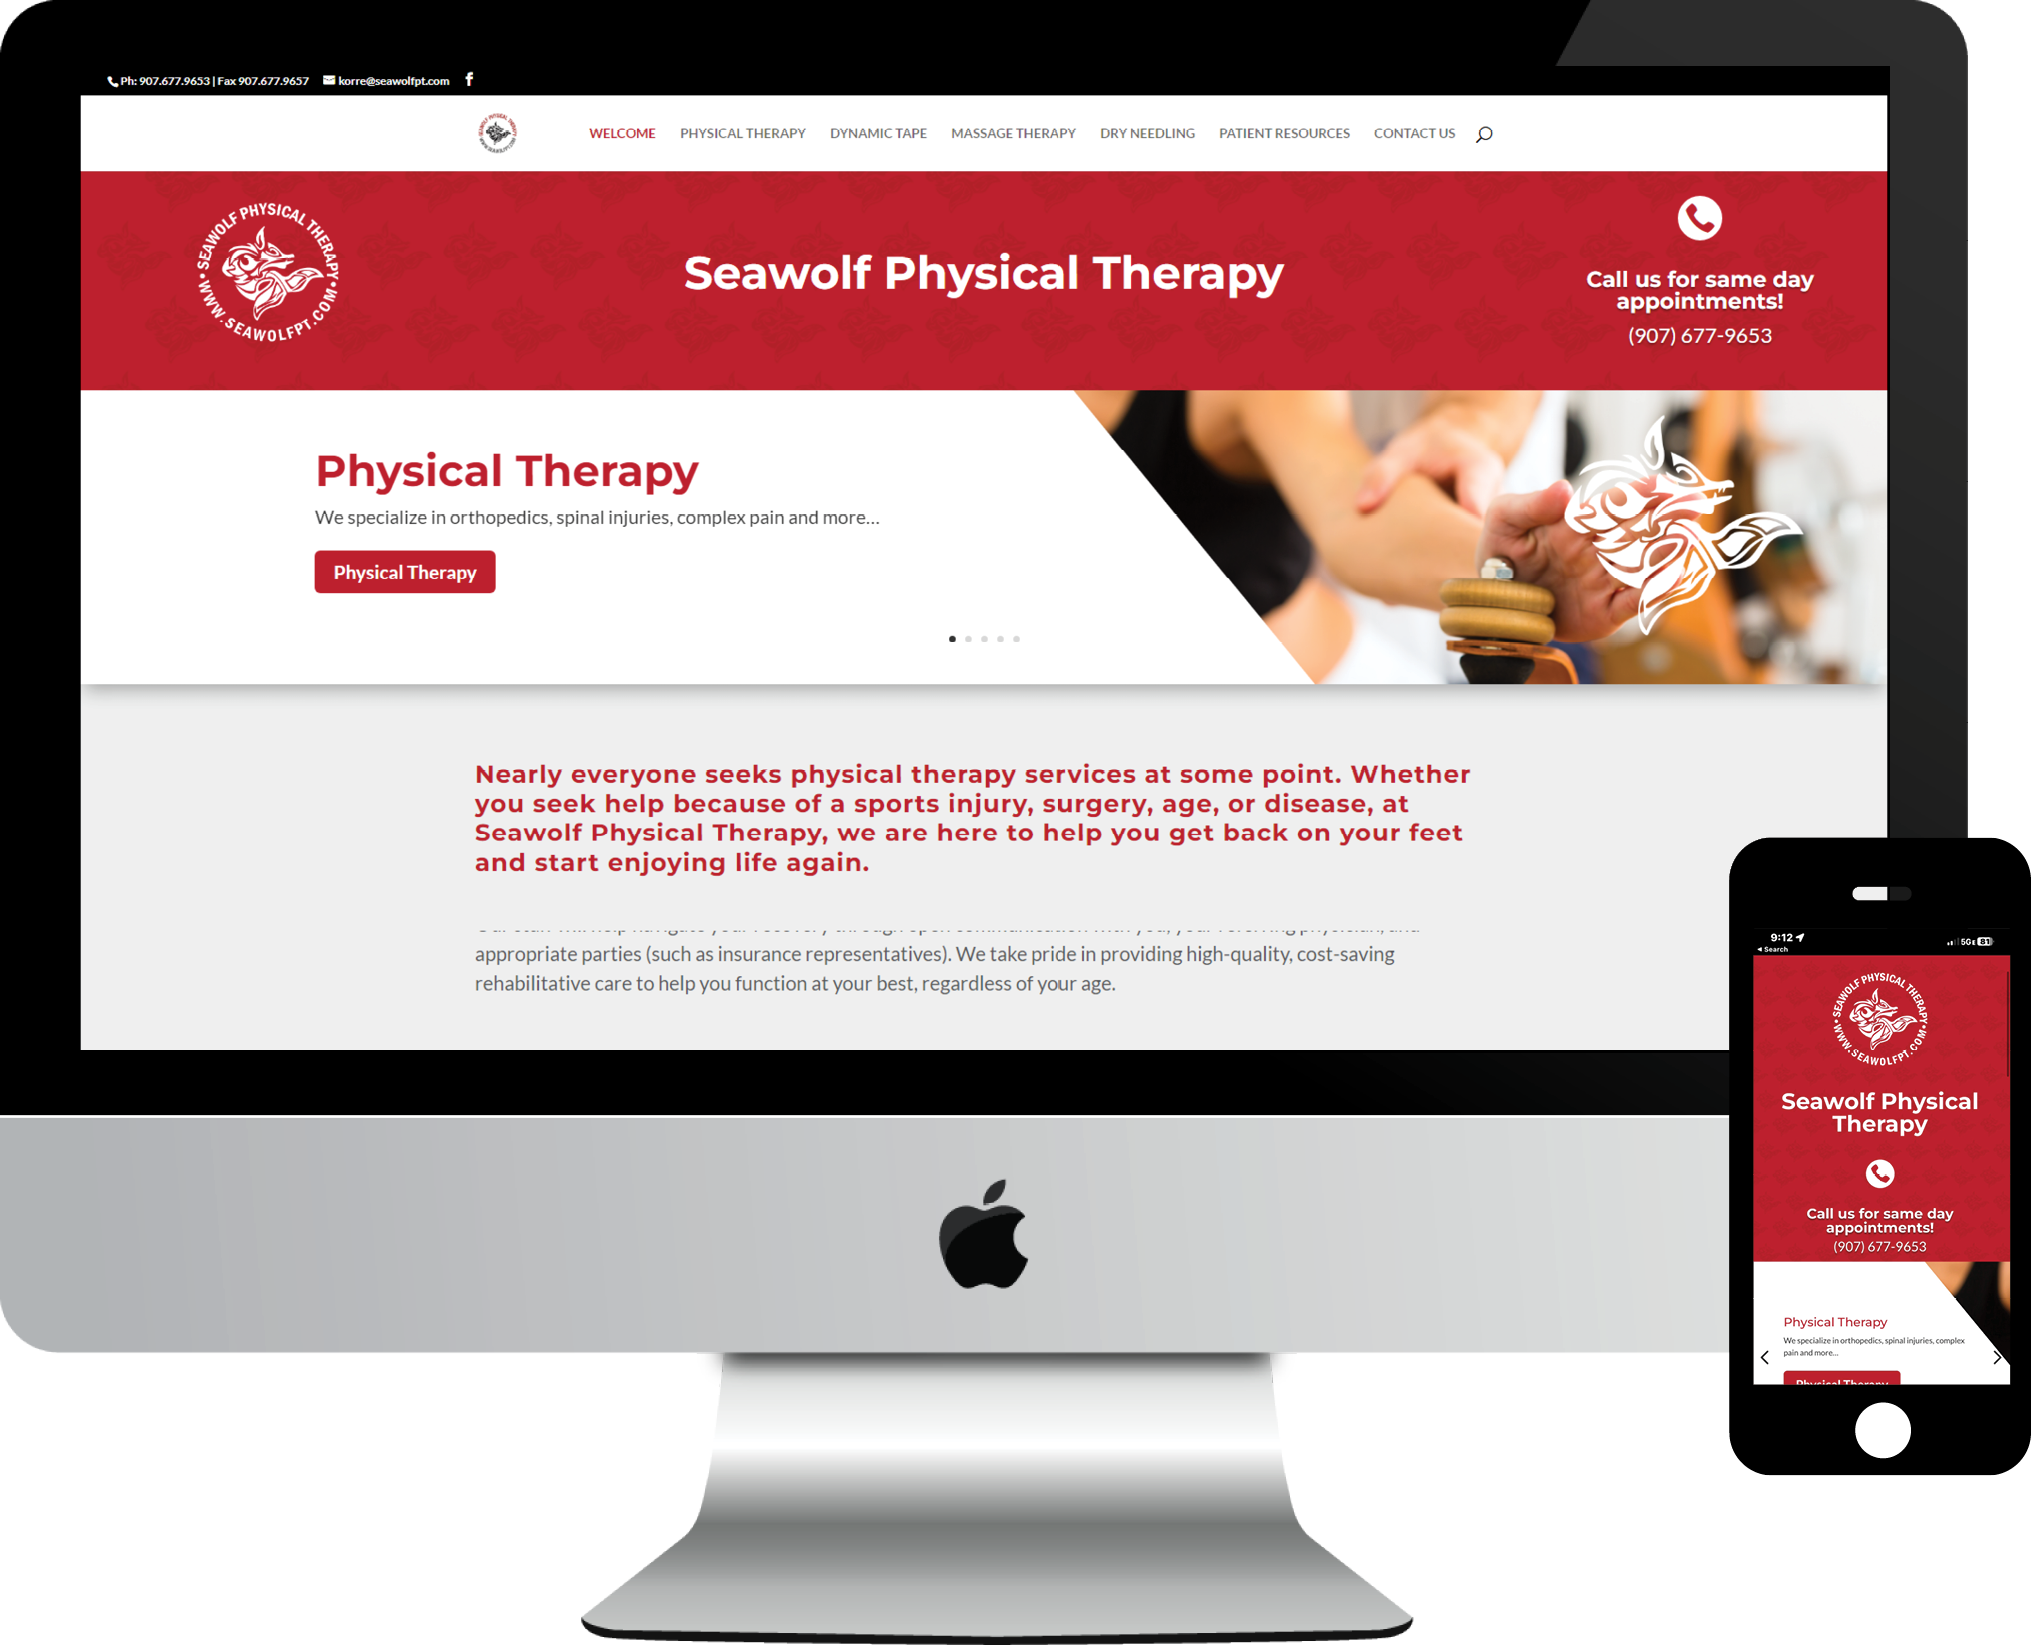 Seawolf Physical Therapy